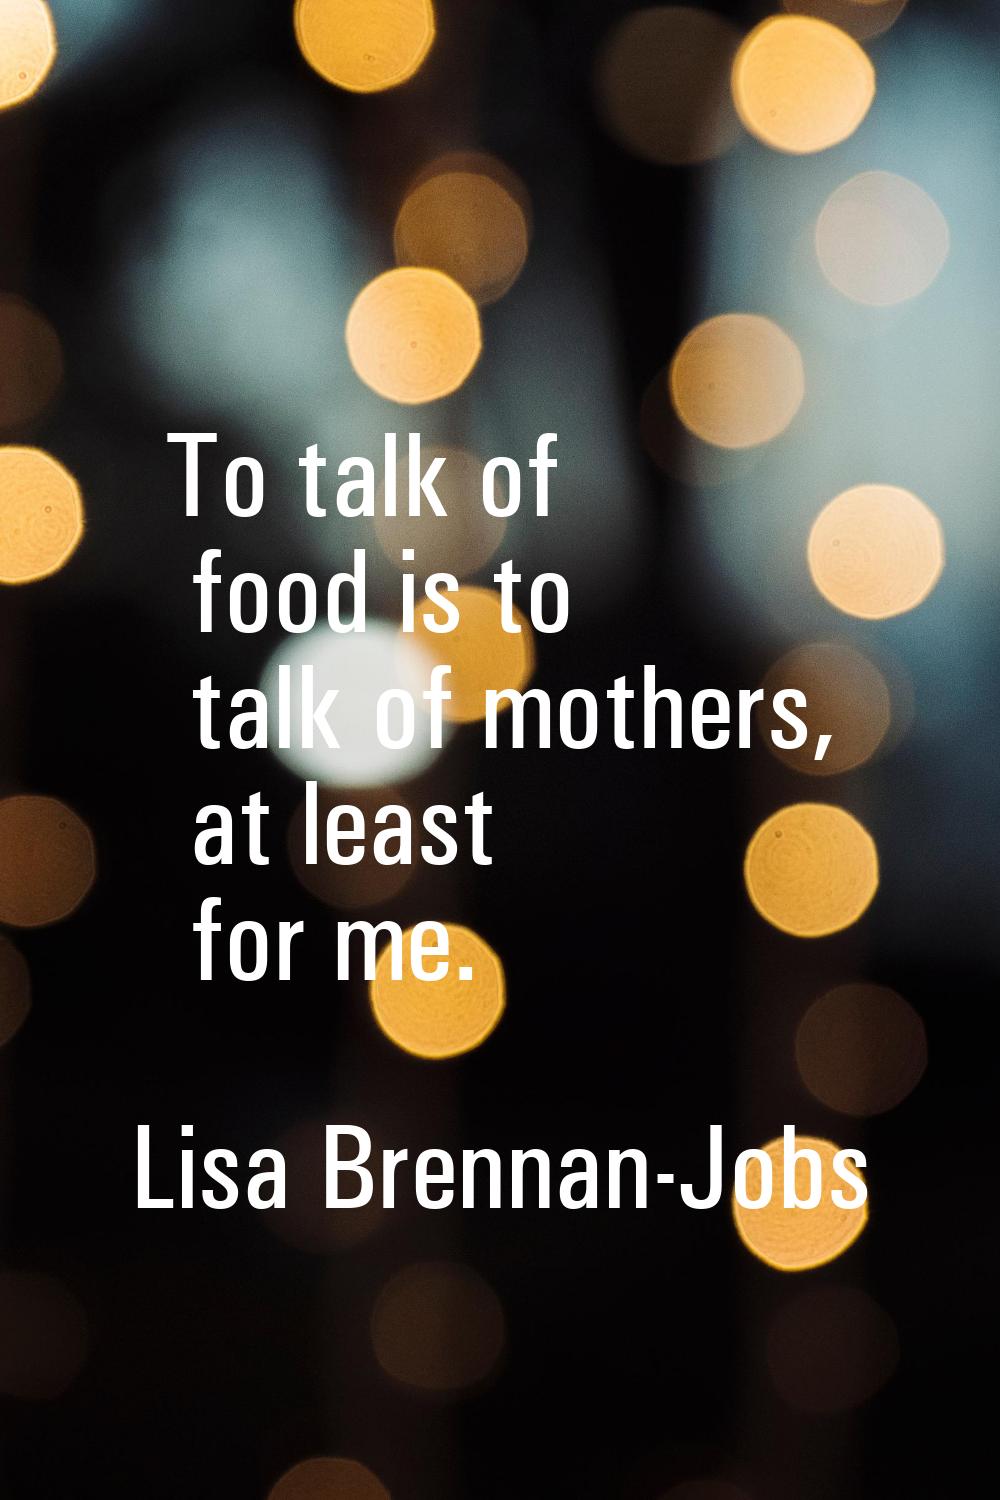 To talk of food is to talk of mothers, at least for me.